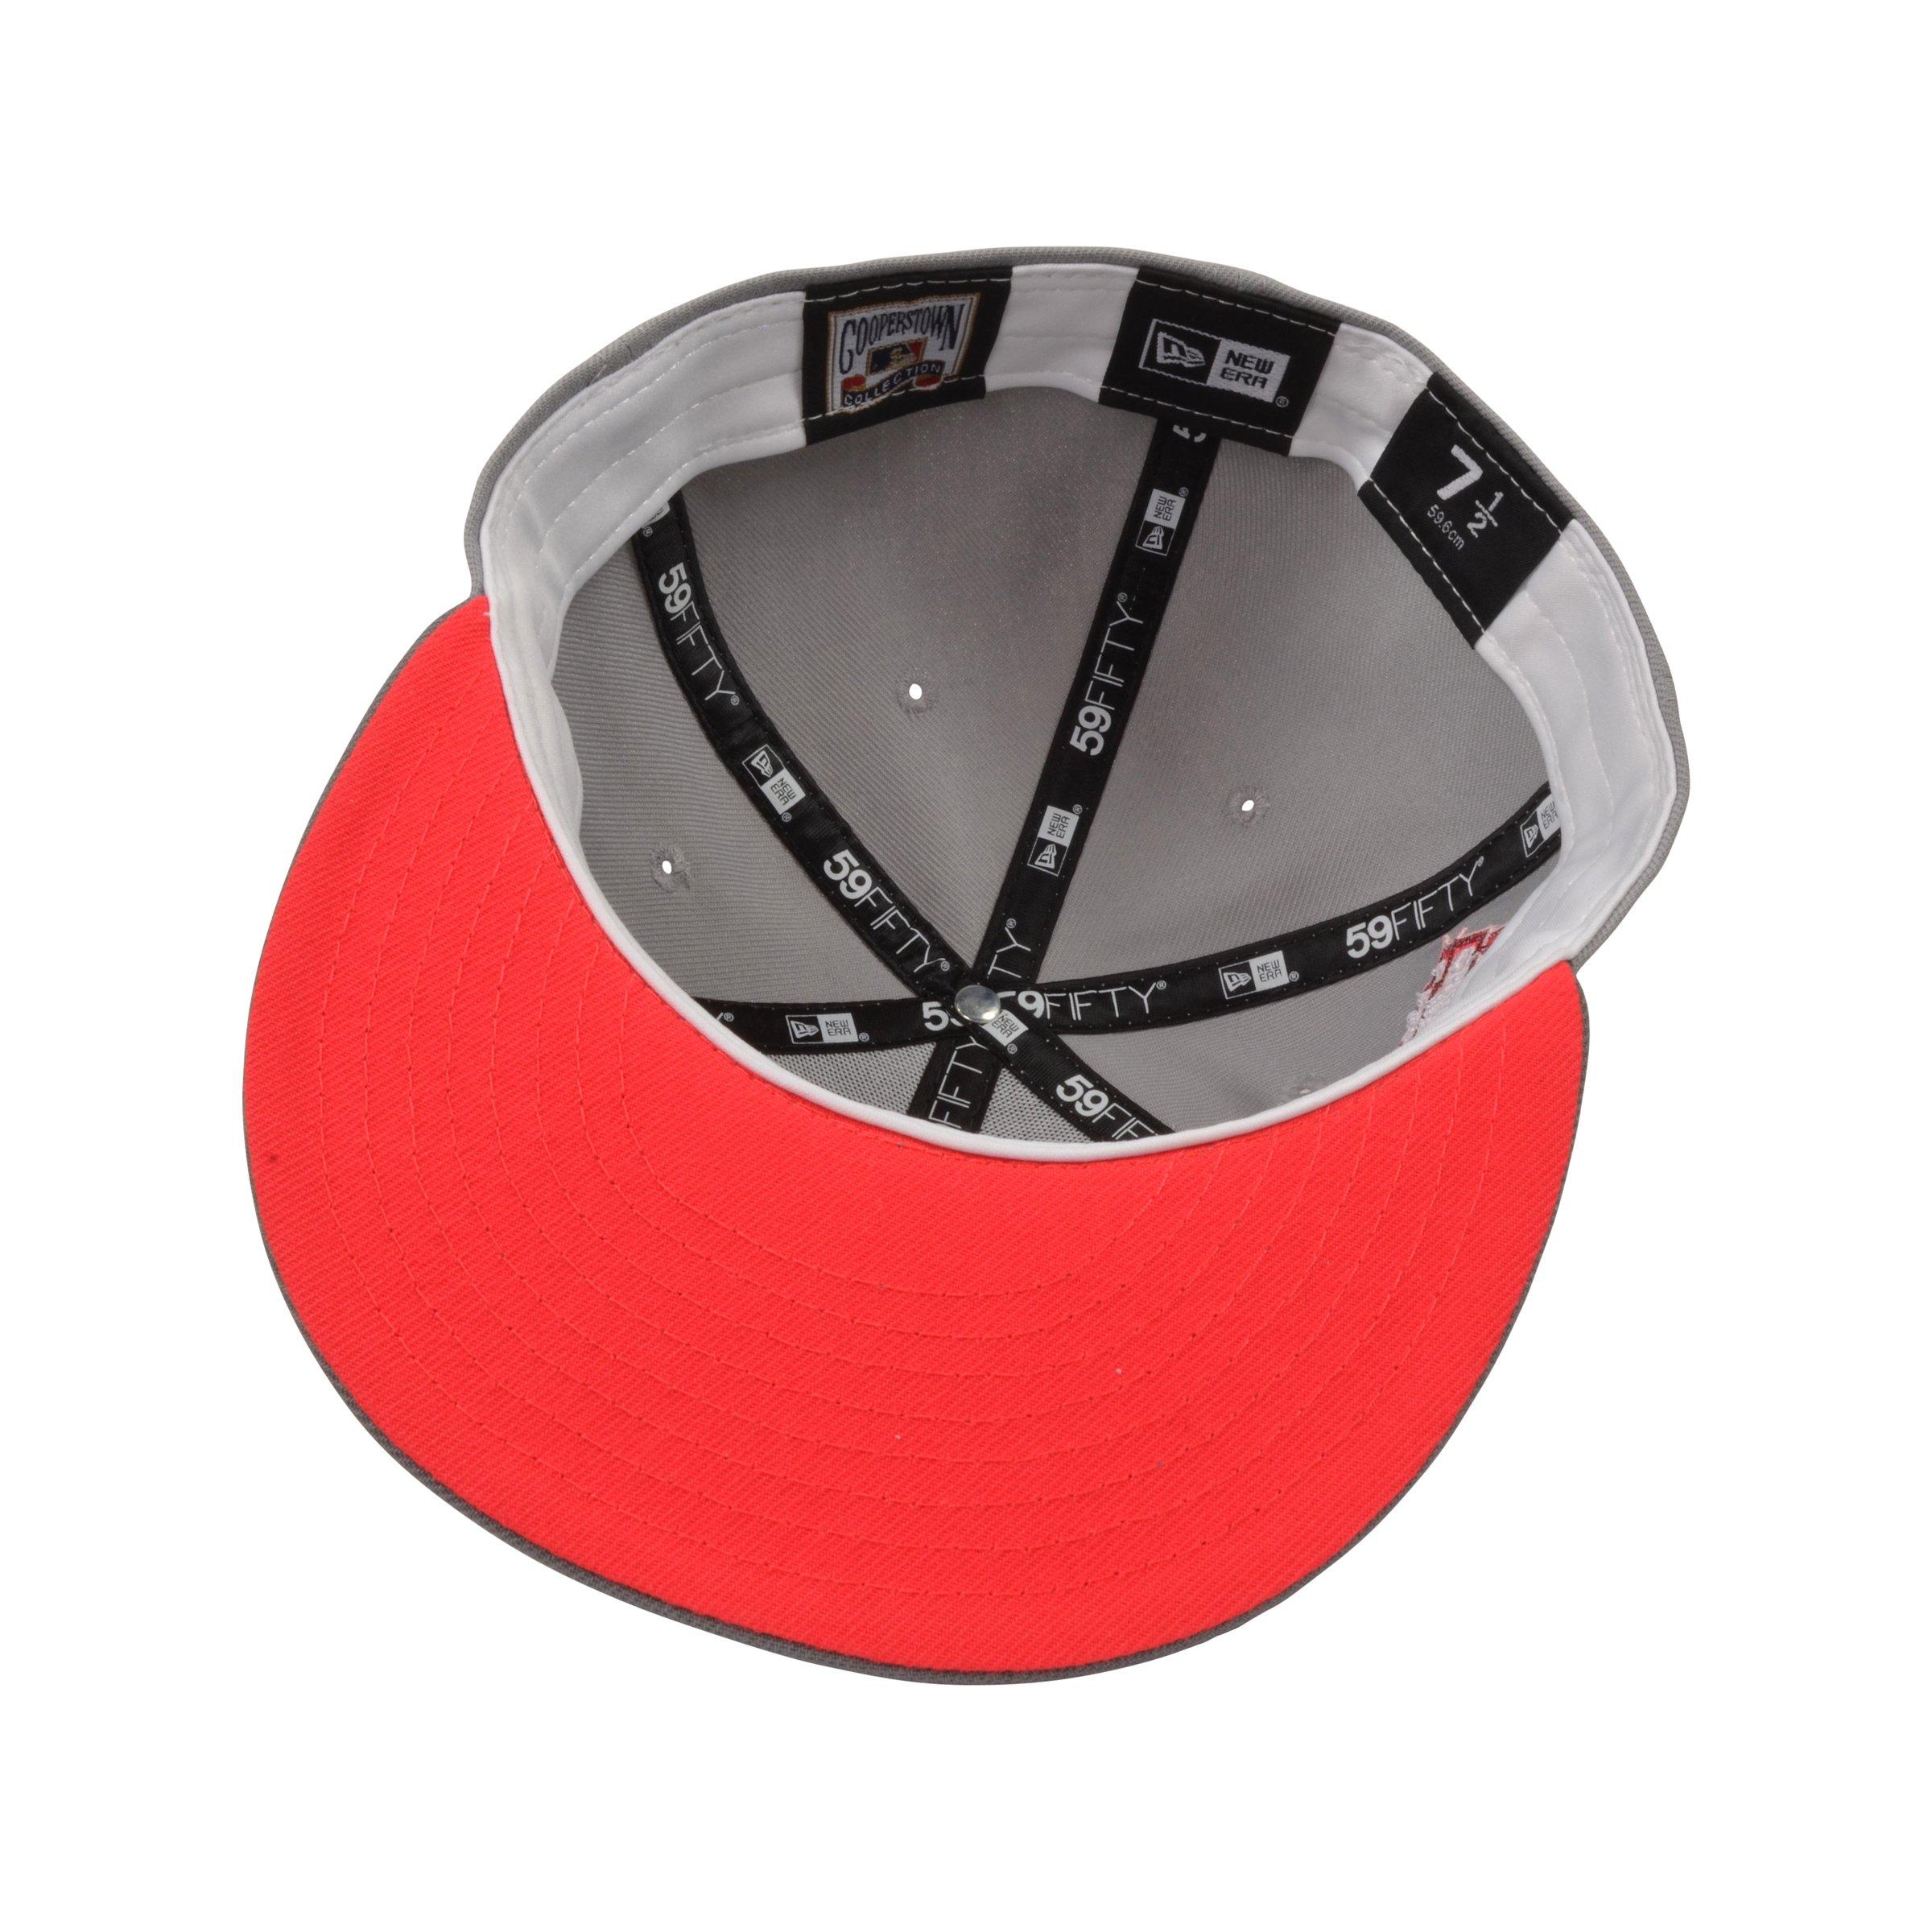 infrared fitted hat